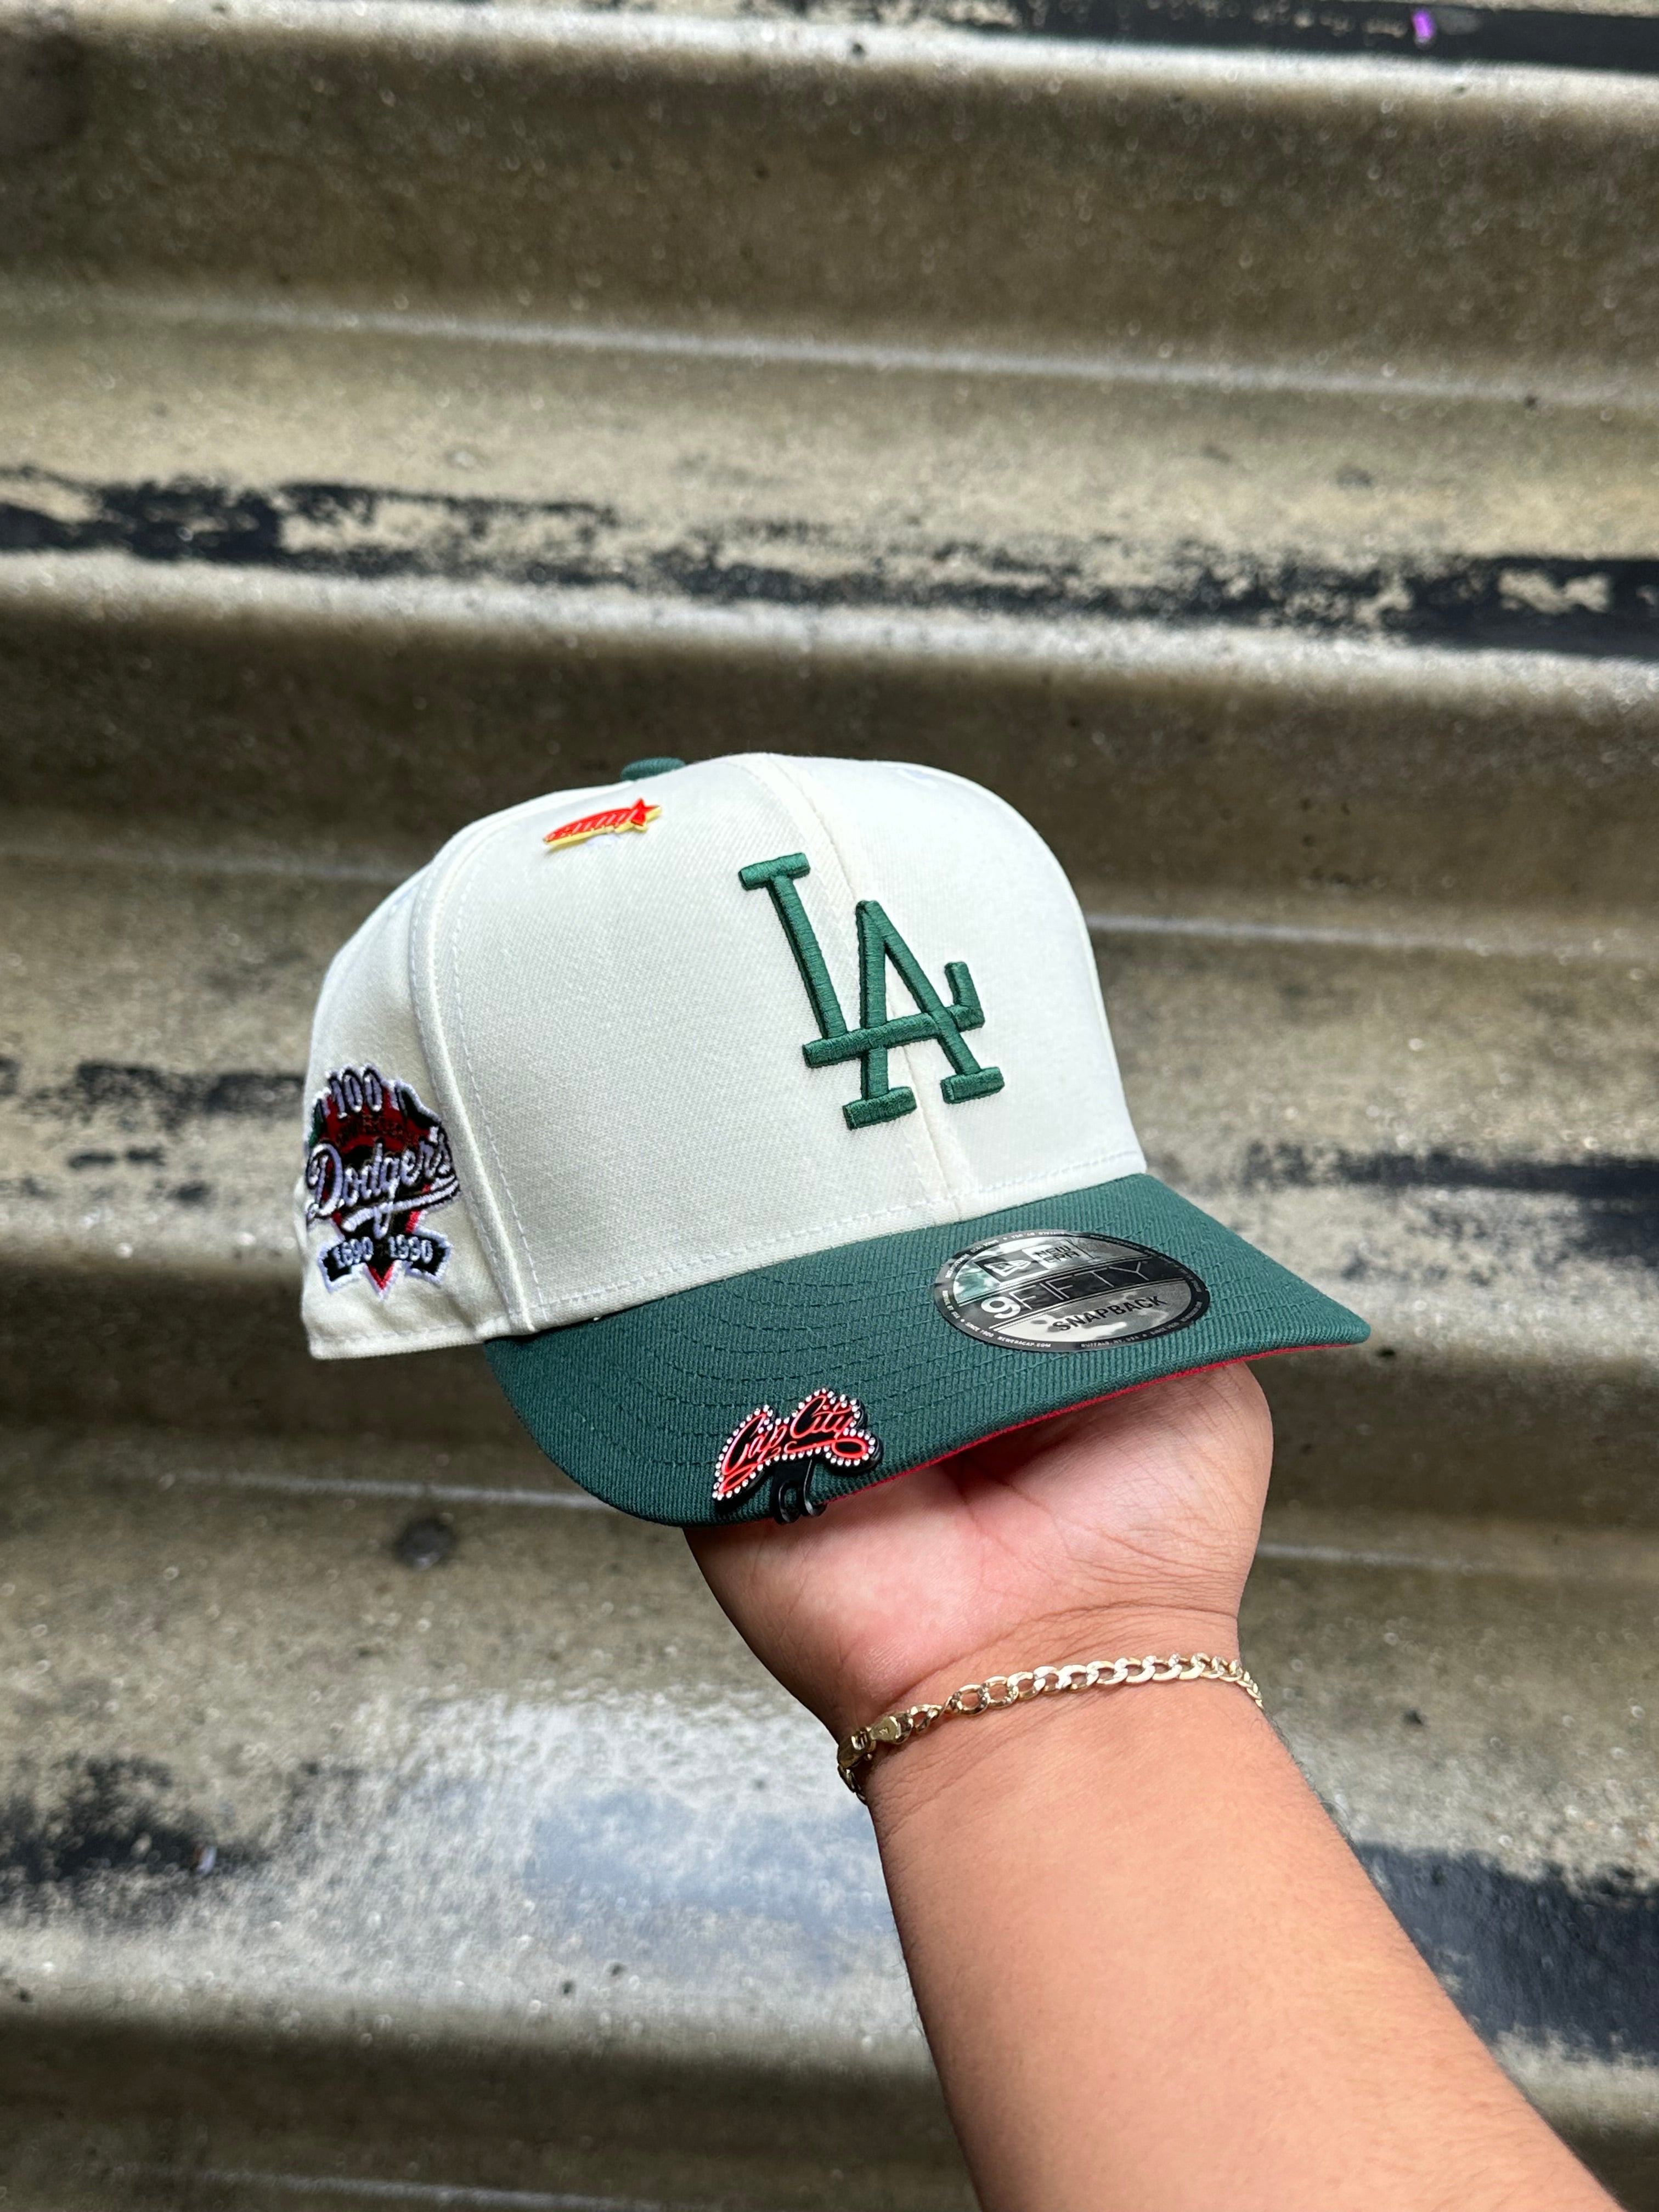 NEW ERA EXCLUSIVE 9FIFTY CHROME WHITE/GREEN LOS ANGELES DODGERS SNAPBACK W/ 100TH ANNIVERSARY PATCH